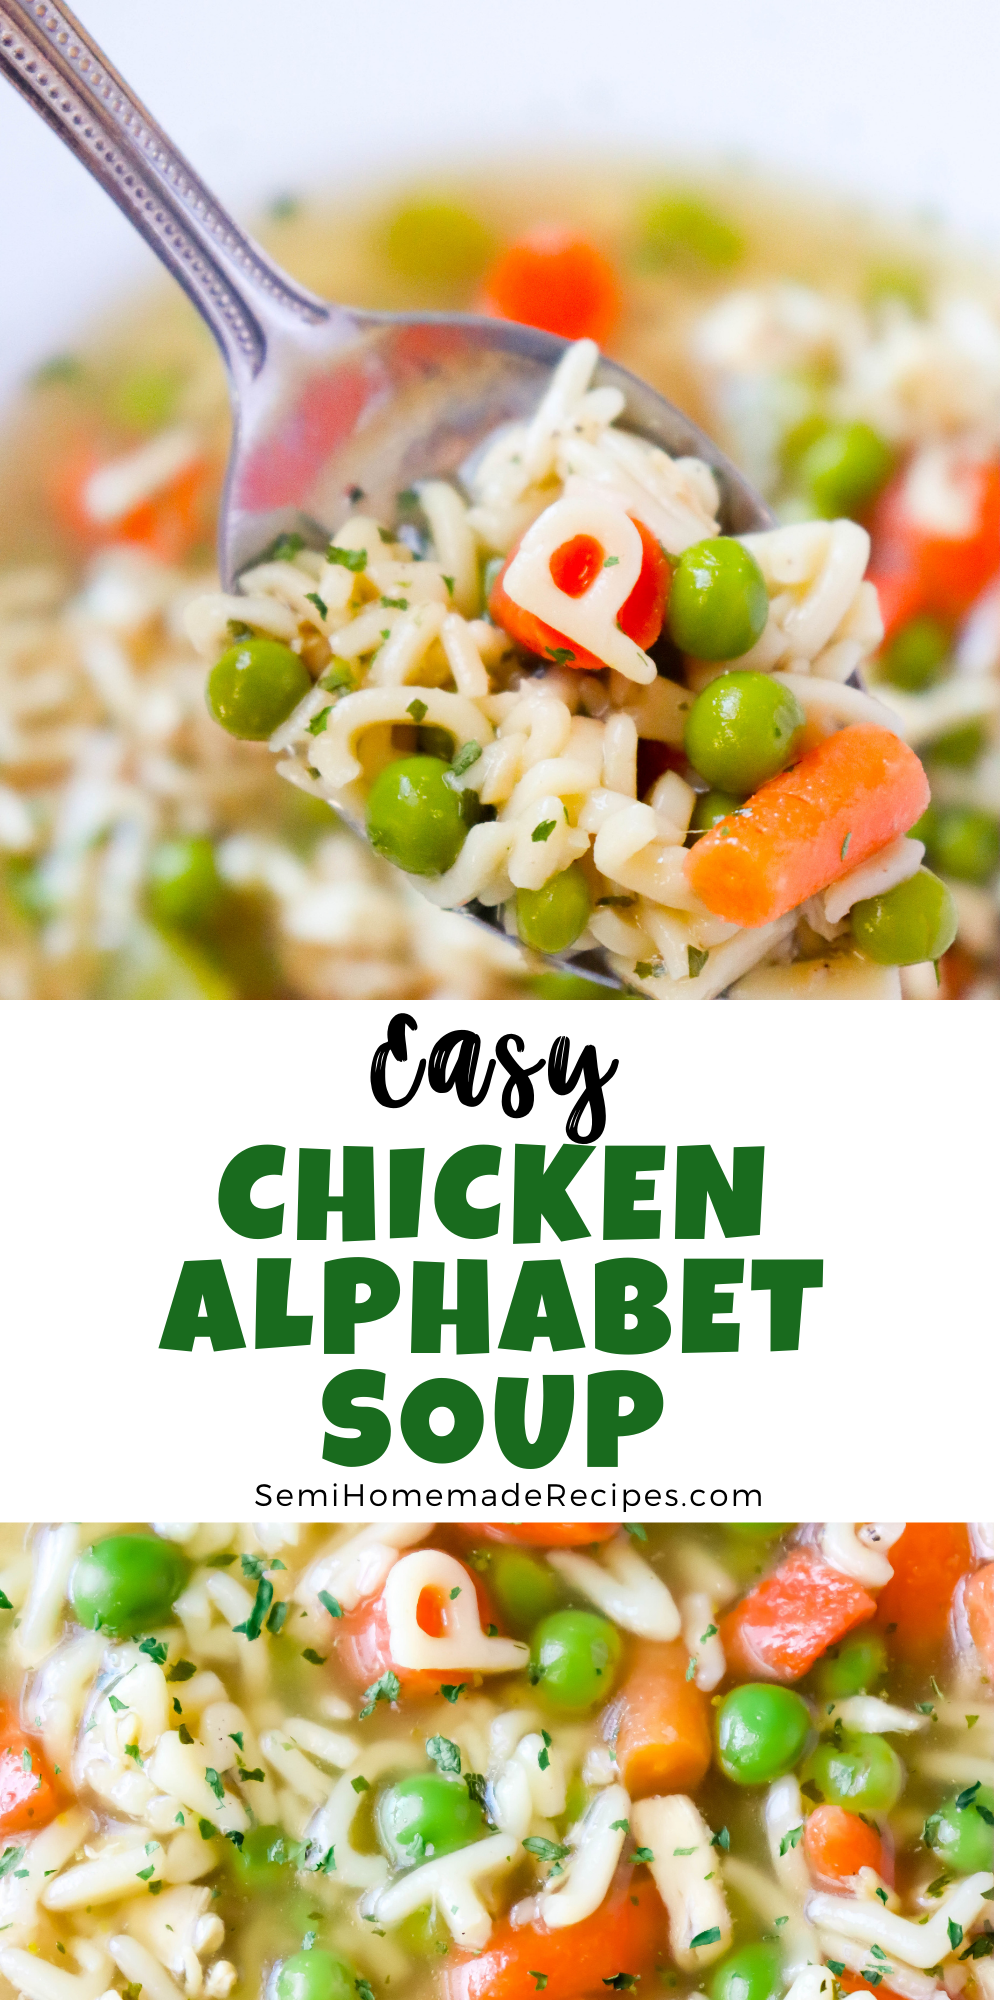 Chicken Alphabet Soup - a semi homemade chicken noodle soup with alphabet pasta, carrots, celery and peas! Using a packet of packet Maggi Alphabet Soup Mix for our seasonings and pasta!